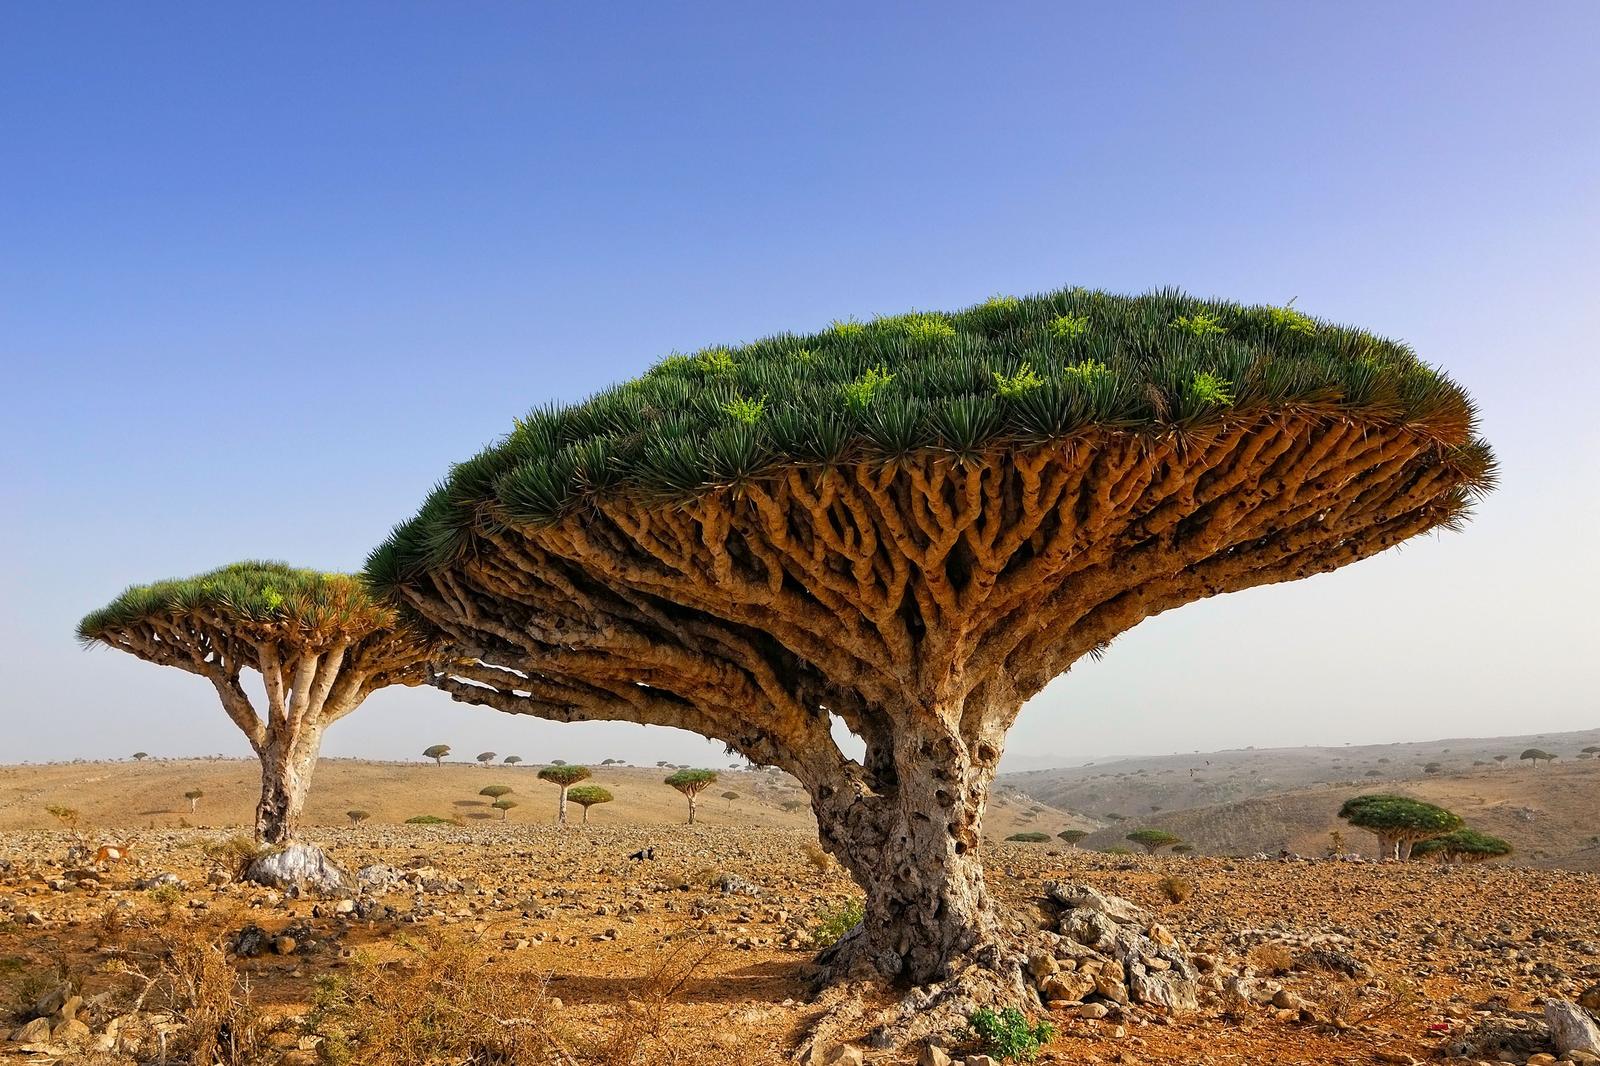 22 Trivia Questions & Answers From Boogers To Black Forest Quiz Dragon blood trees in Socotra, Yemen